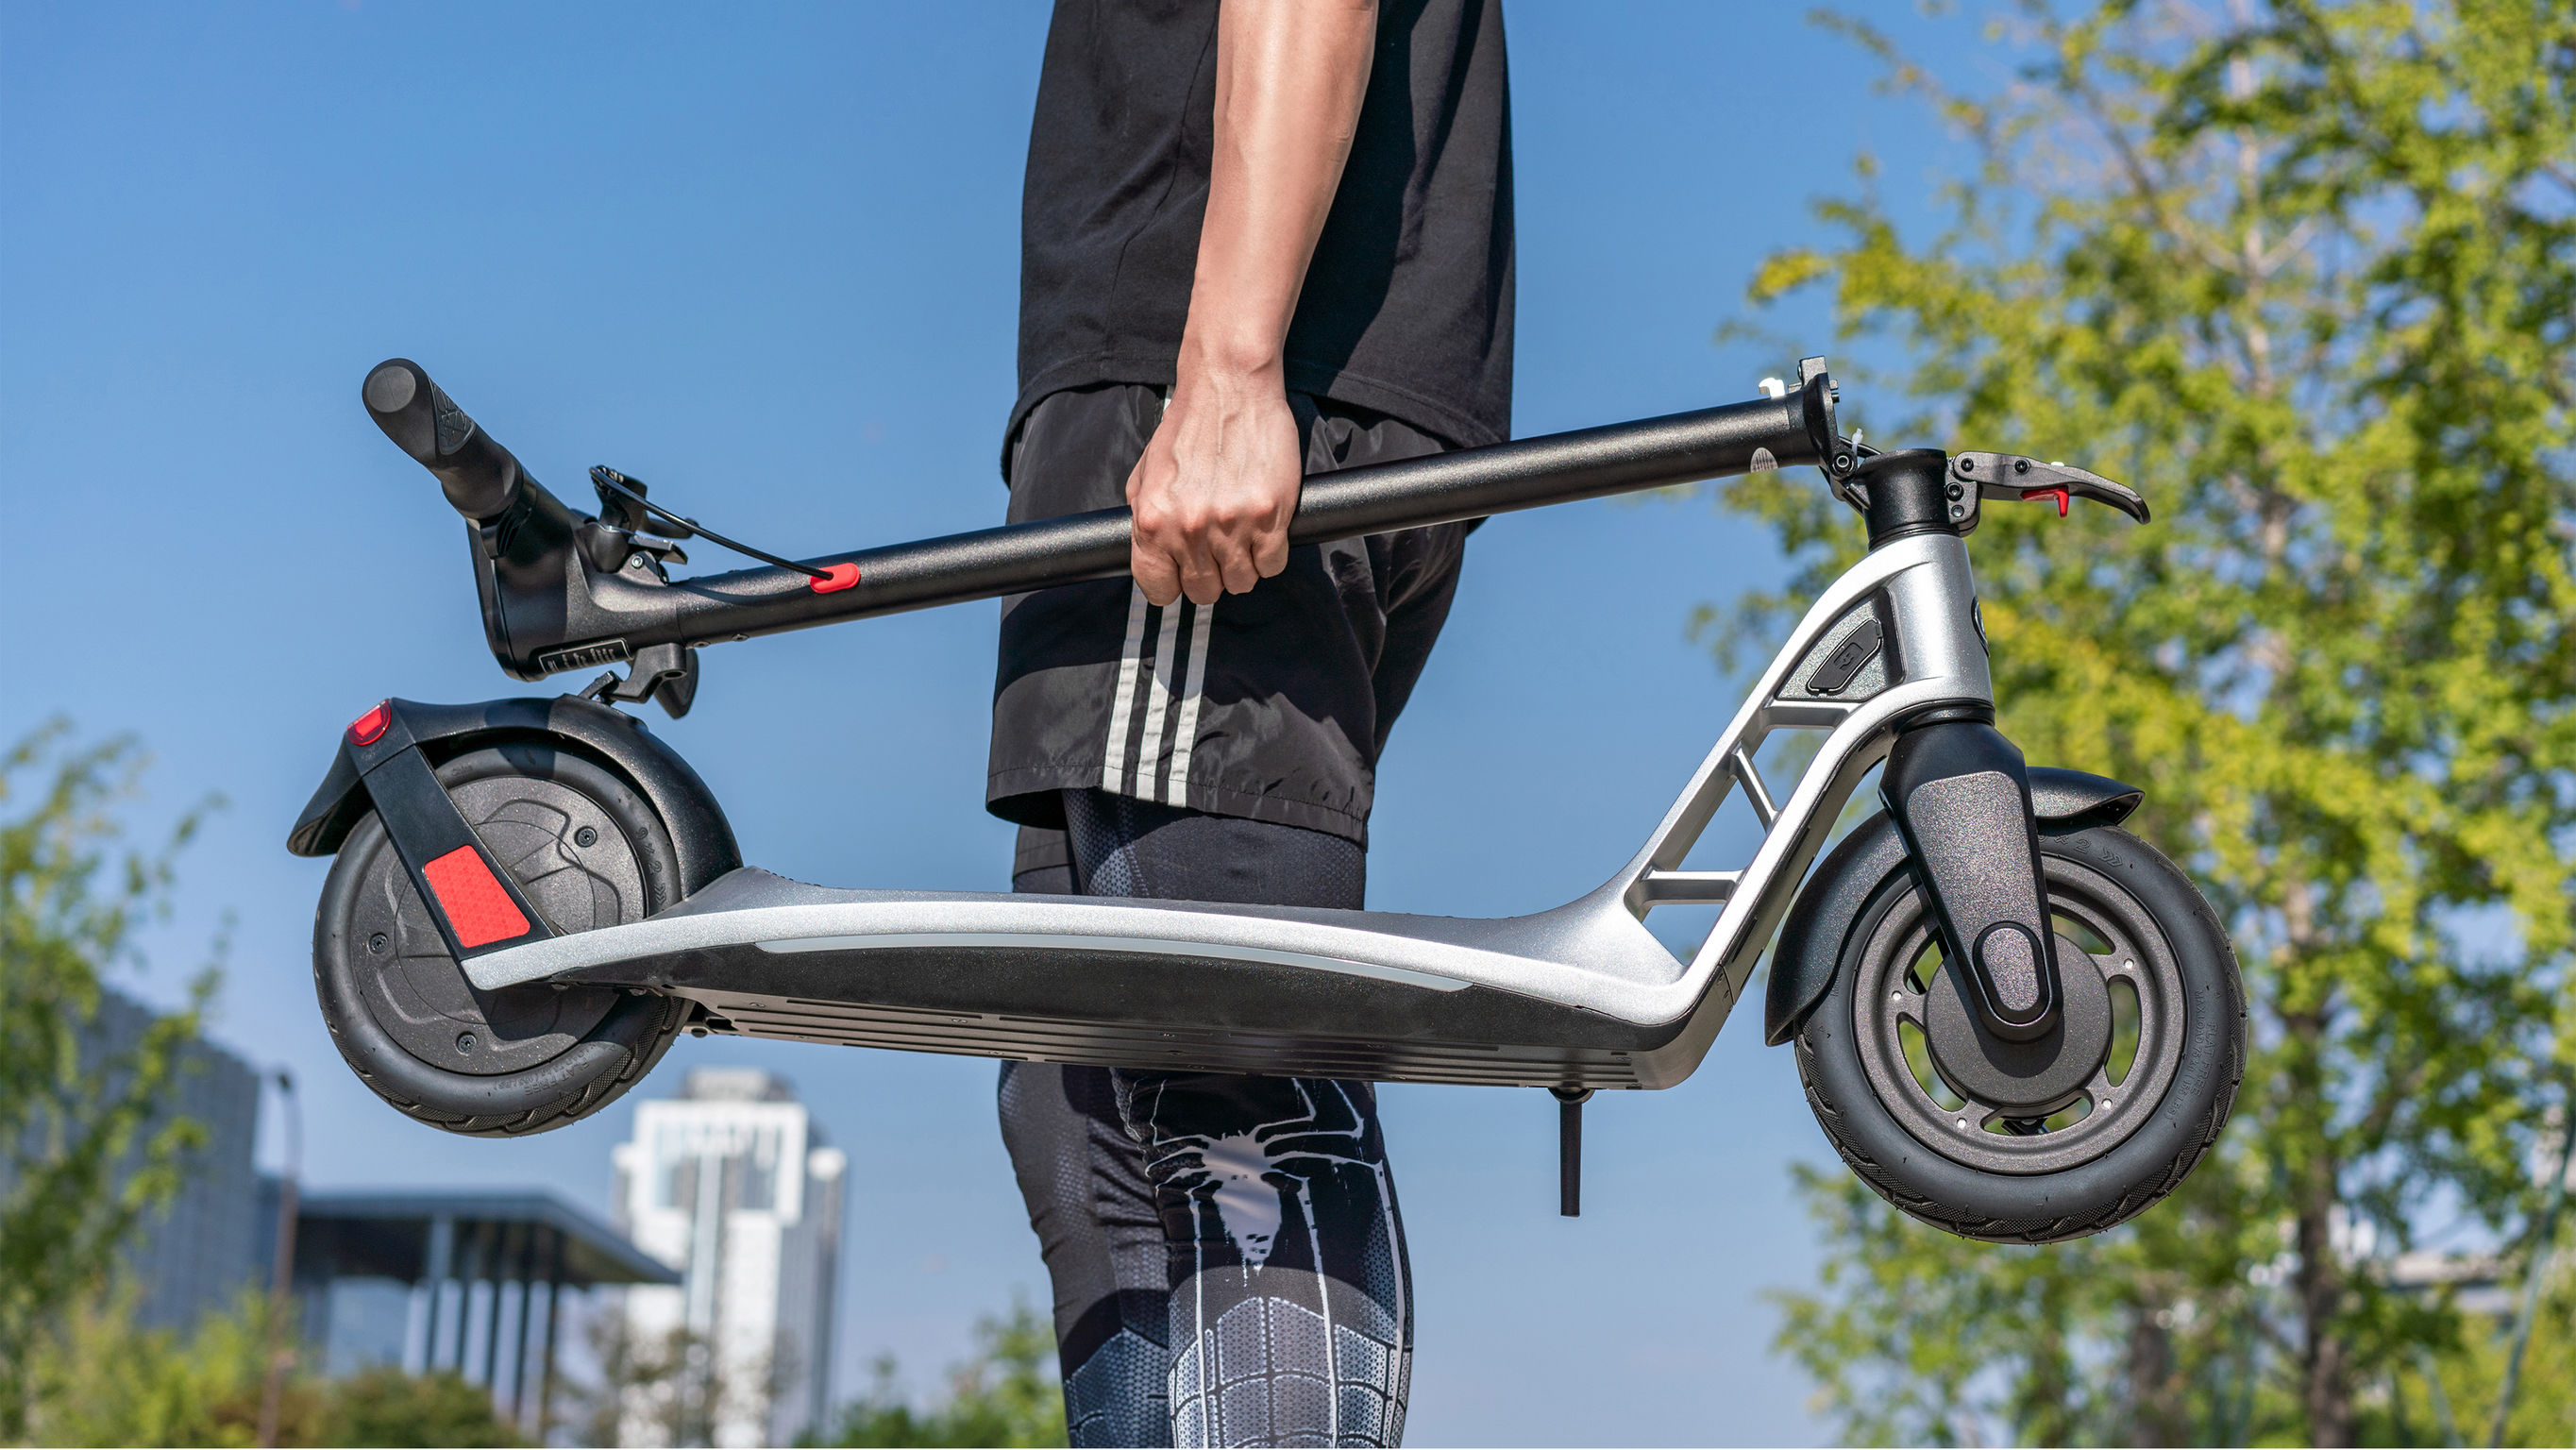 PXID Electric Scooter